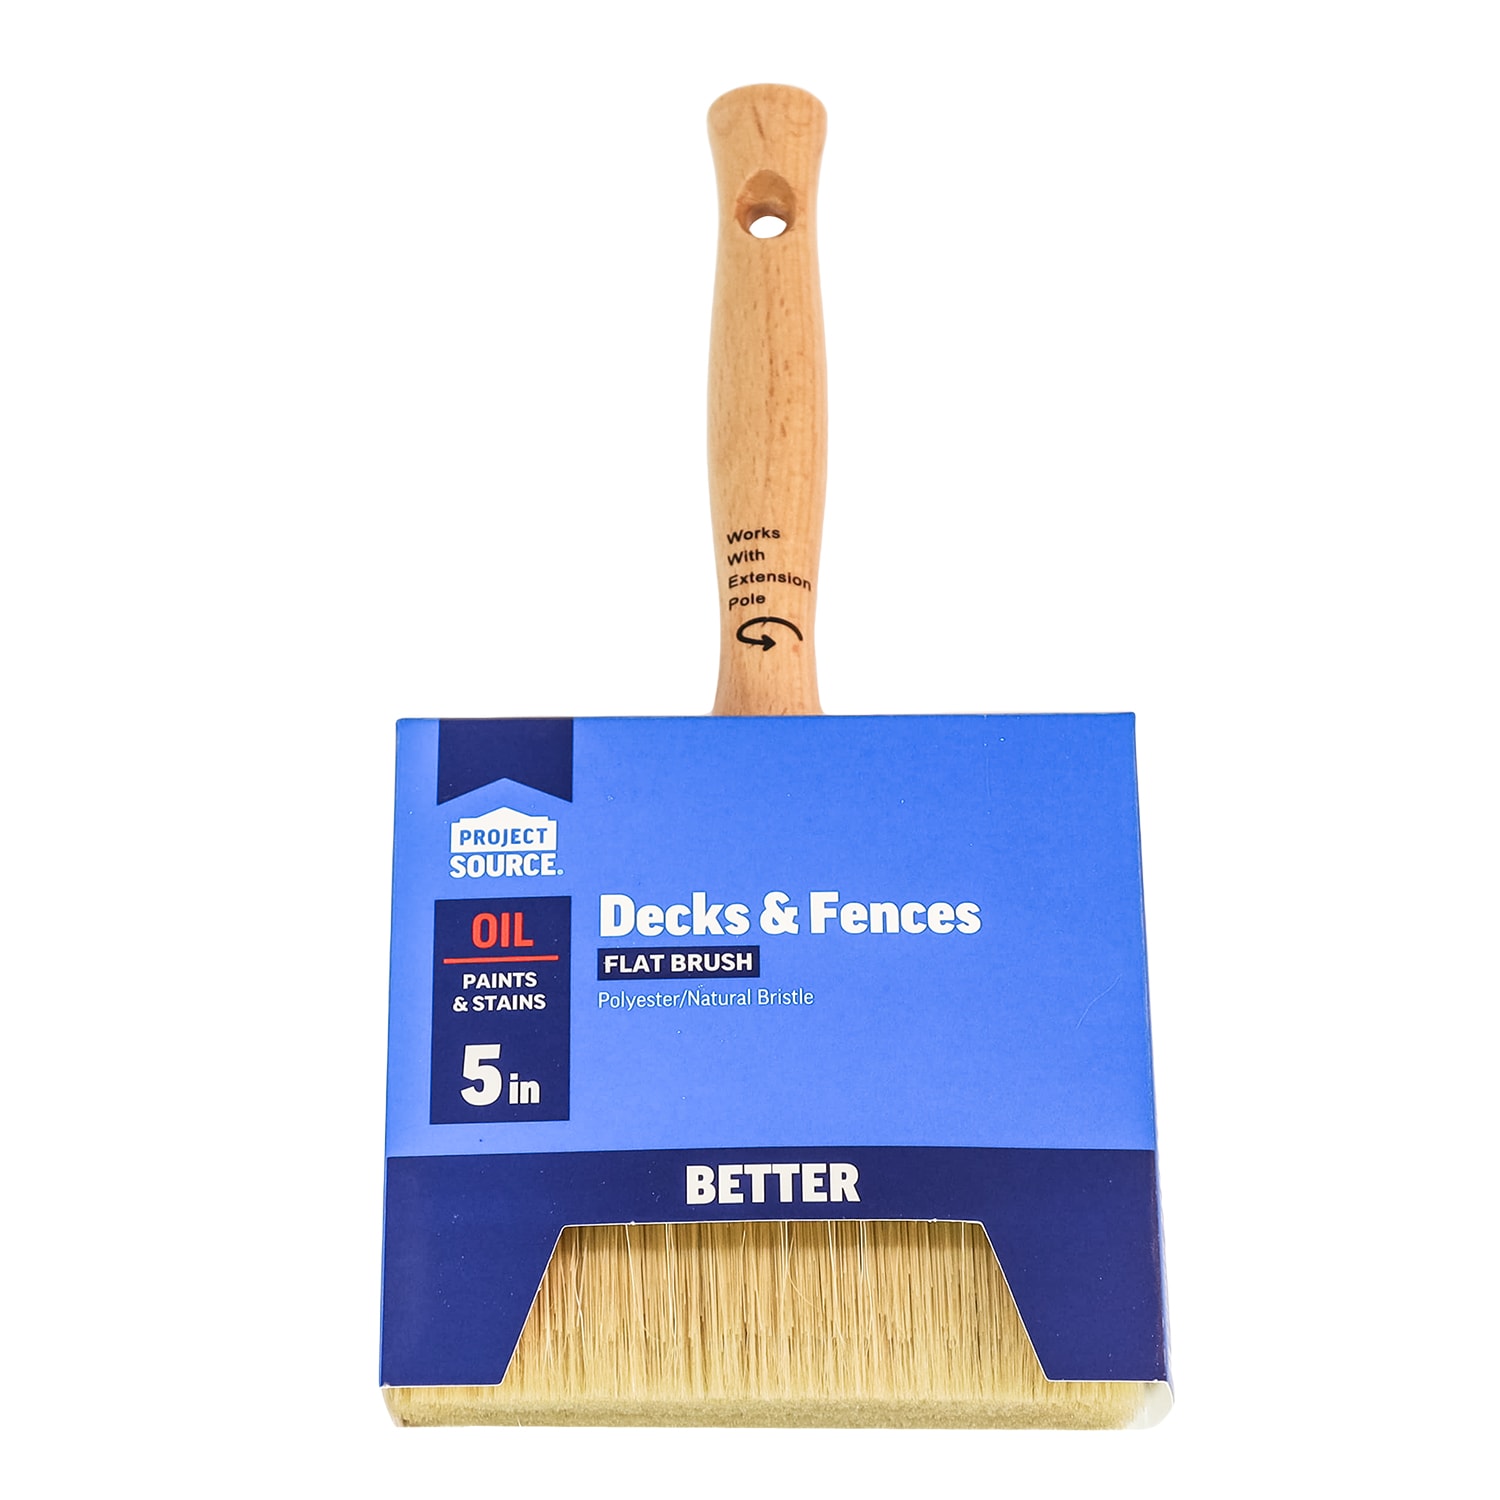 Magimate Wall Paint Brush Angled Cut-in Trim Brushes 2 1/2 inch Medium Size for Household Touch Ups and Wood Stain Application